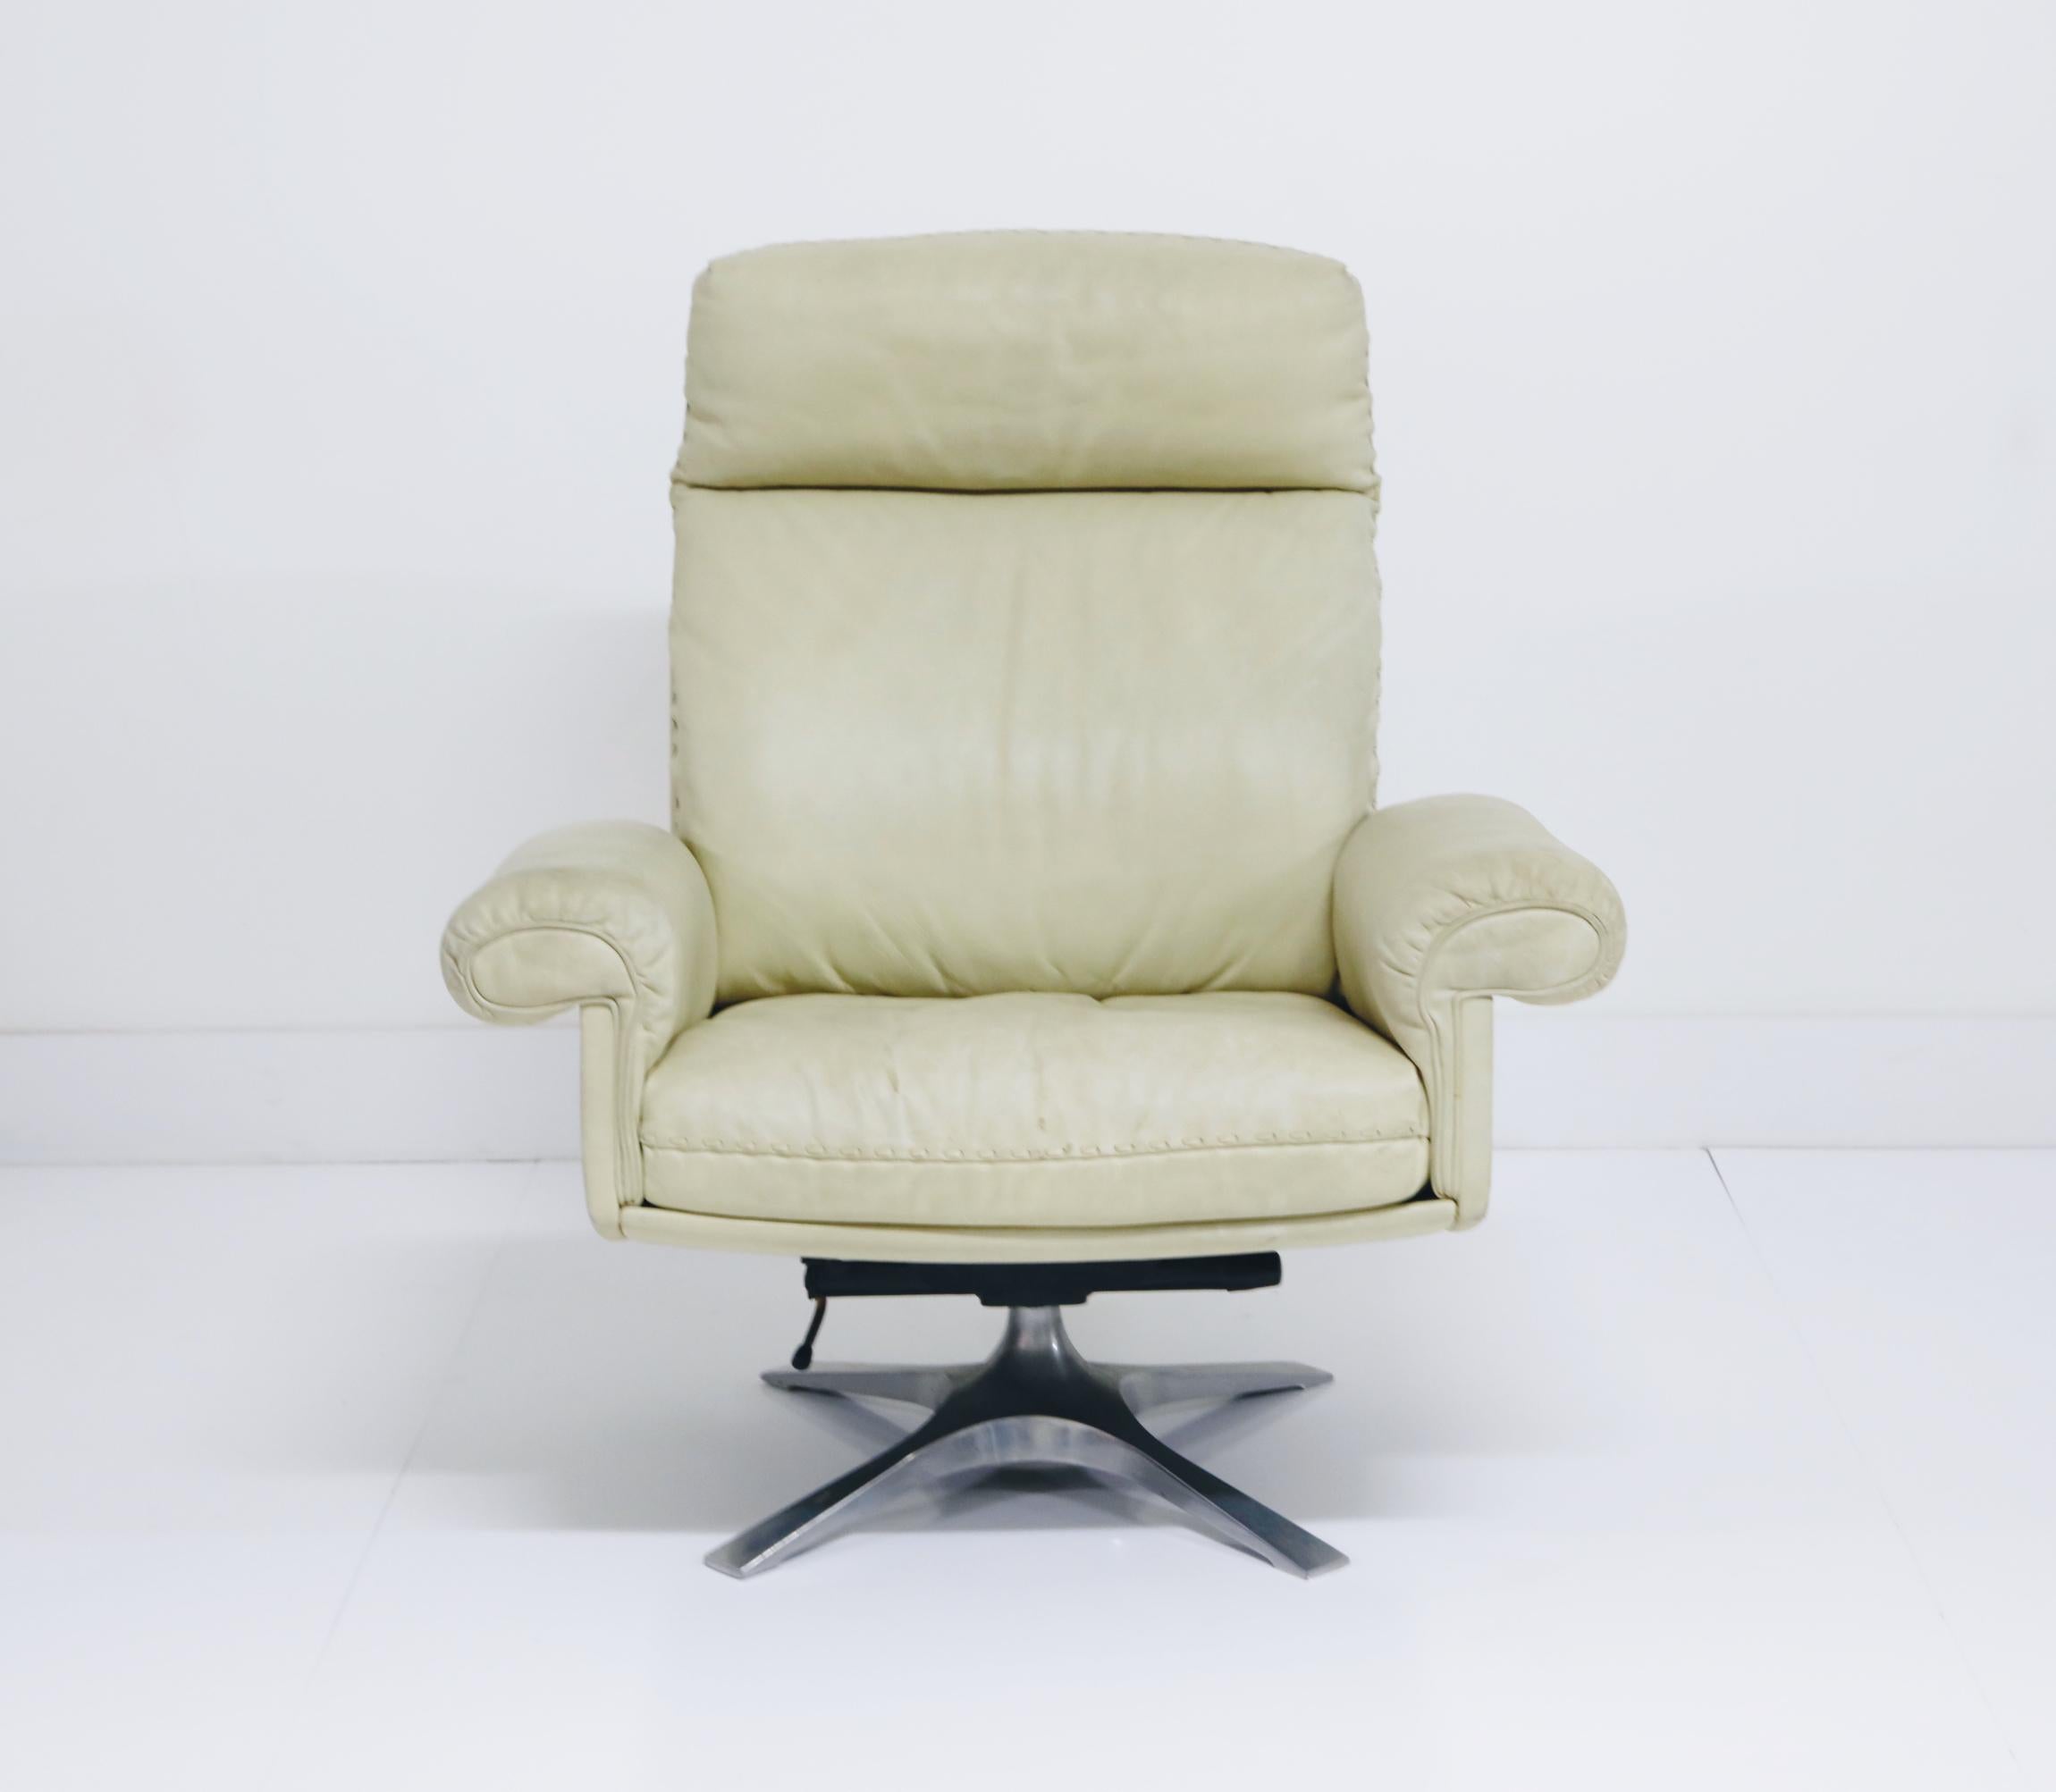 Casual, refined, laid back and understated. If you are looking for an extremely high-quality lounge chair that speaks volumes on your character, that says while you are successful and appreciate the best in quality, design and style, you prefer the